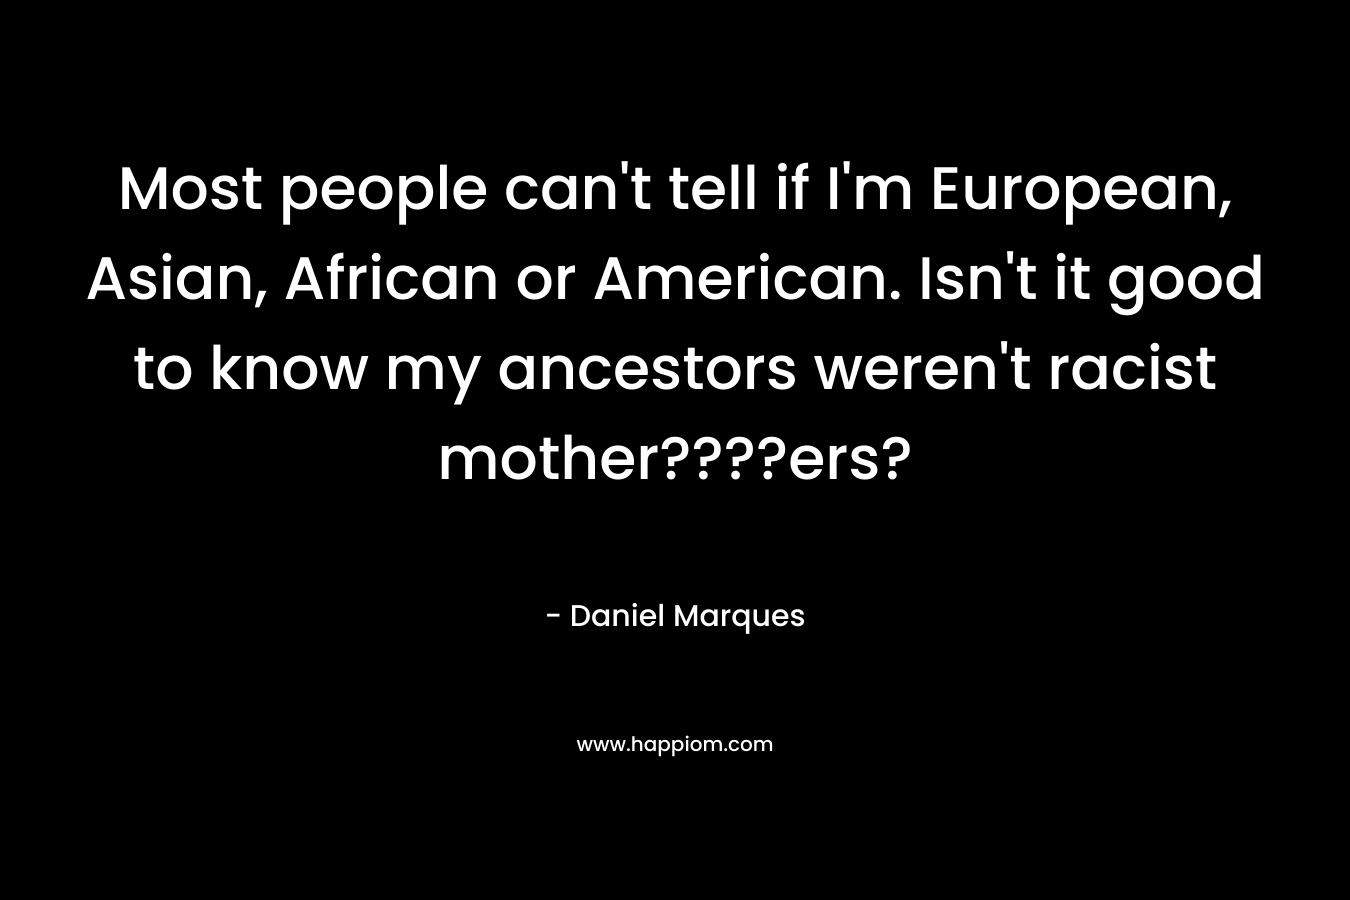 Most people can’t tell if I’m European, Asian, African or American. Isn’t it good to know my ancestors weren’t racist mother????ers? – Daniel Marques